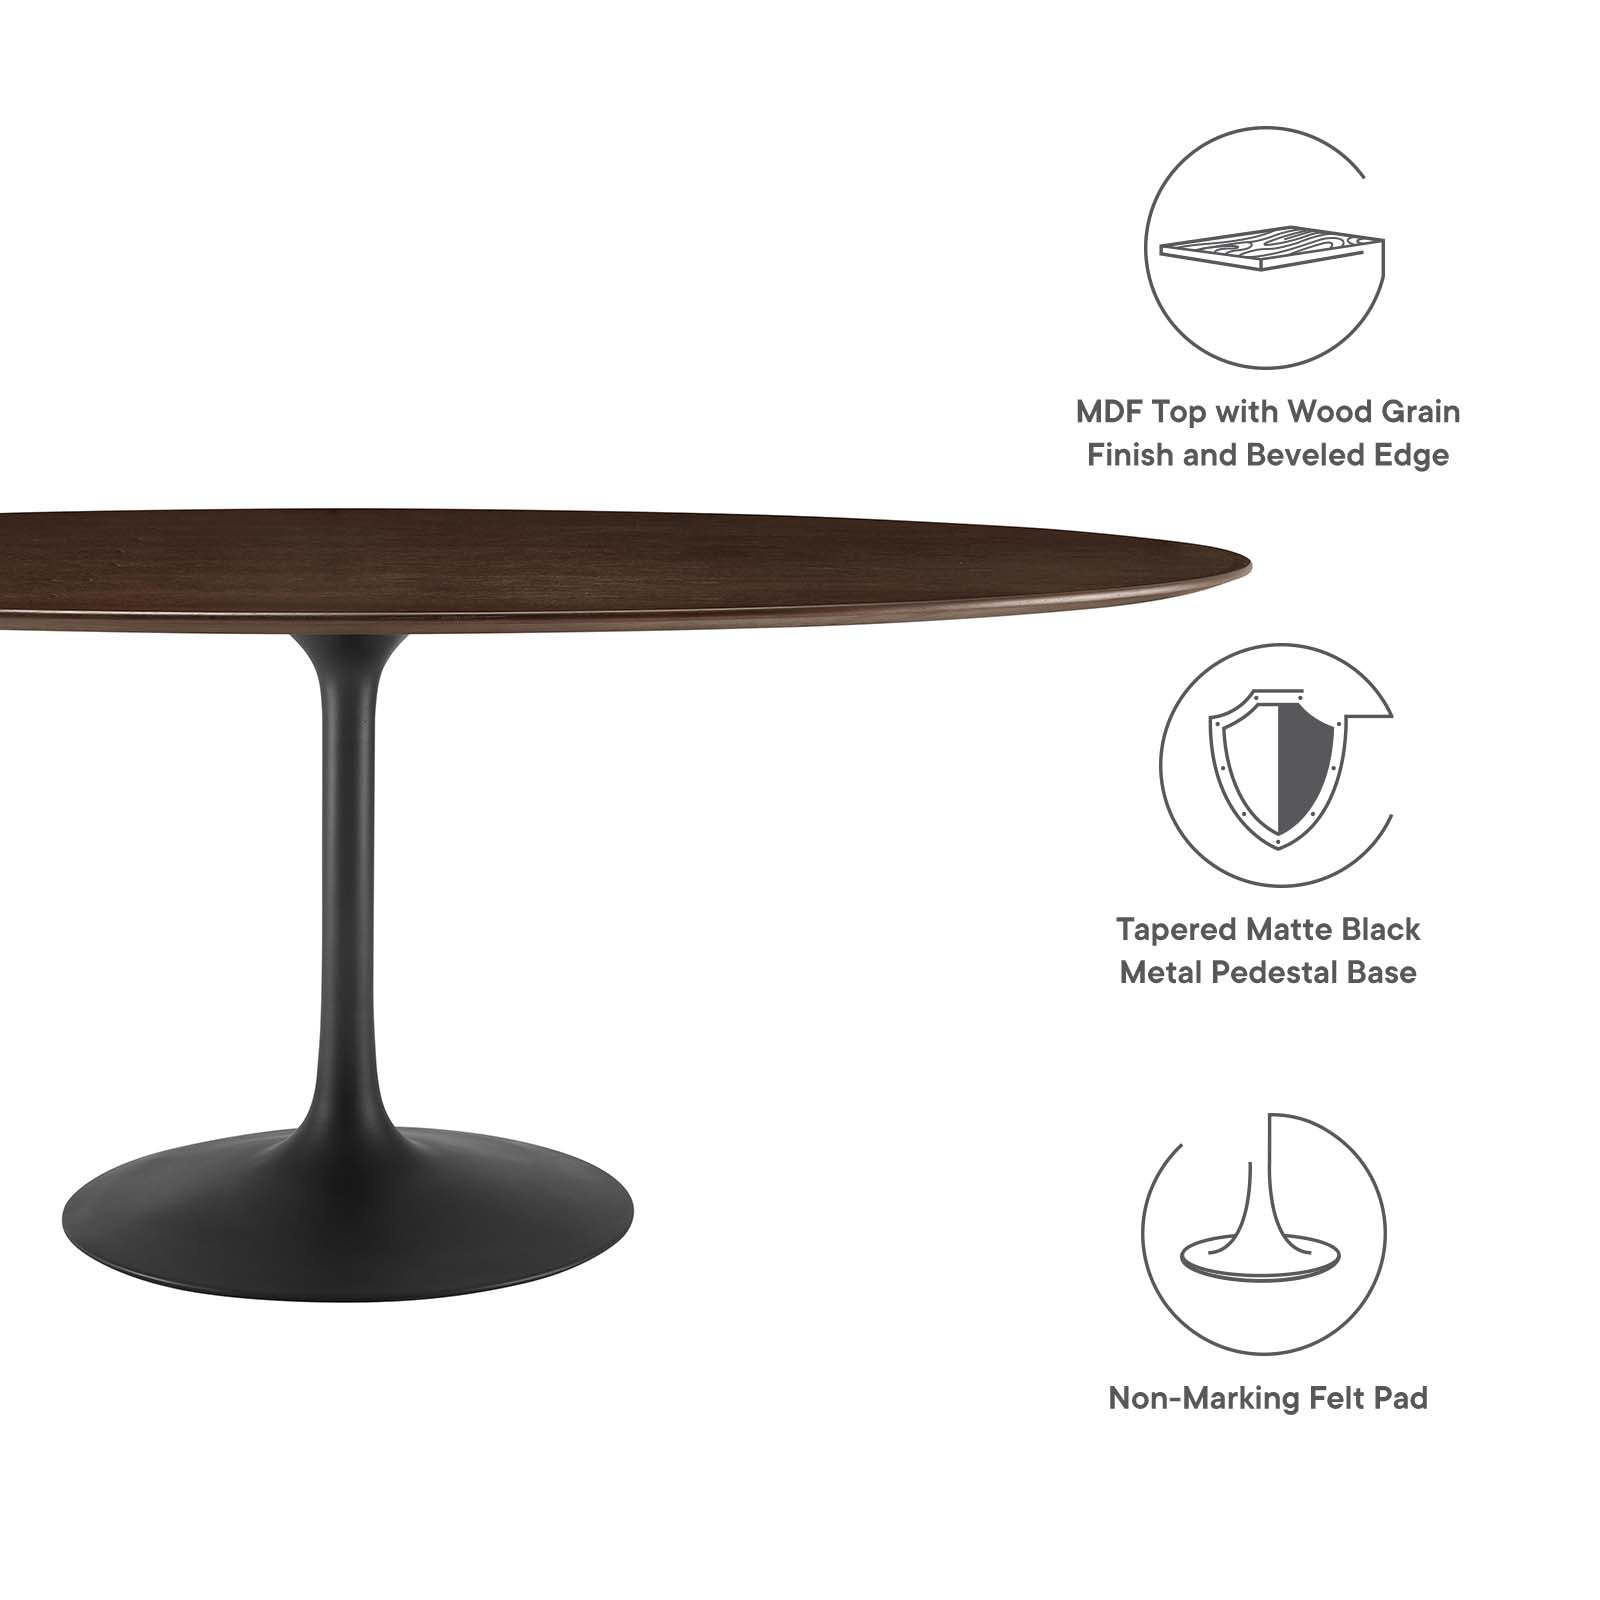 Modway Dining Tables - Lippa 78" Wood Oval Dining Table Black Cherry Walnut